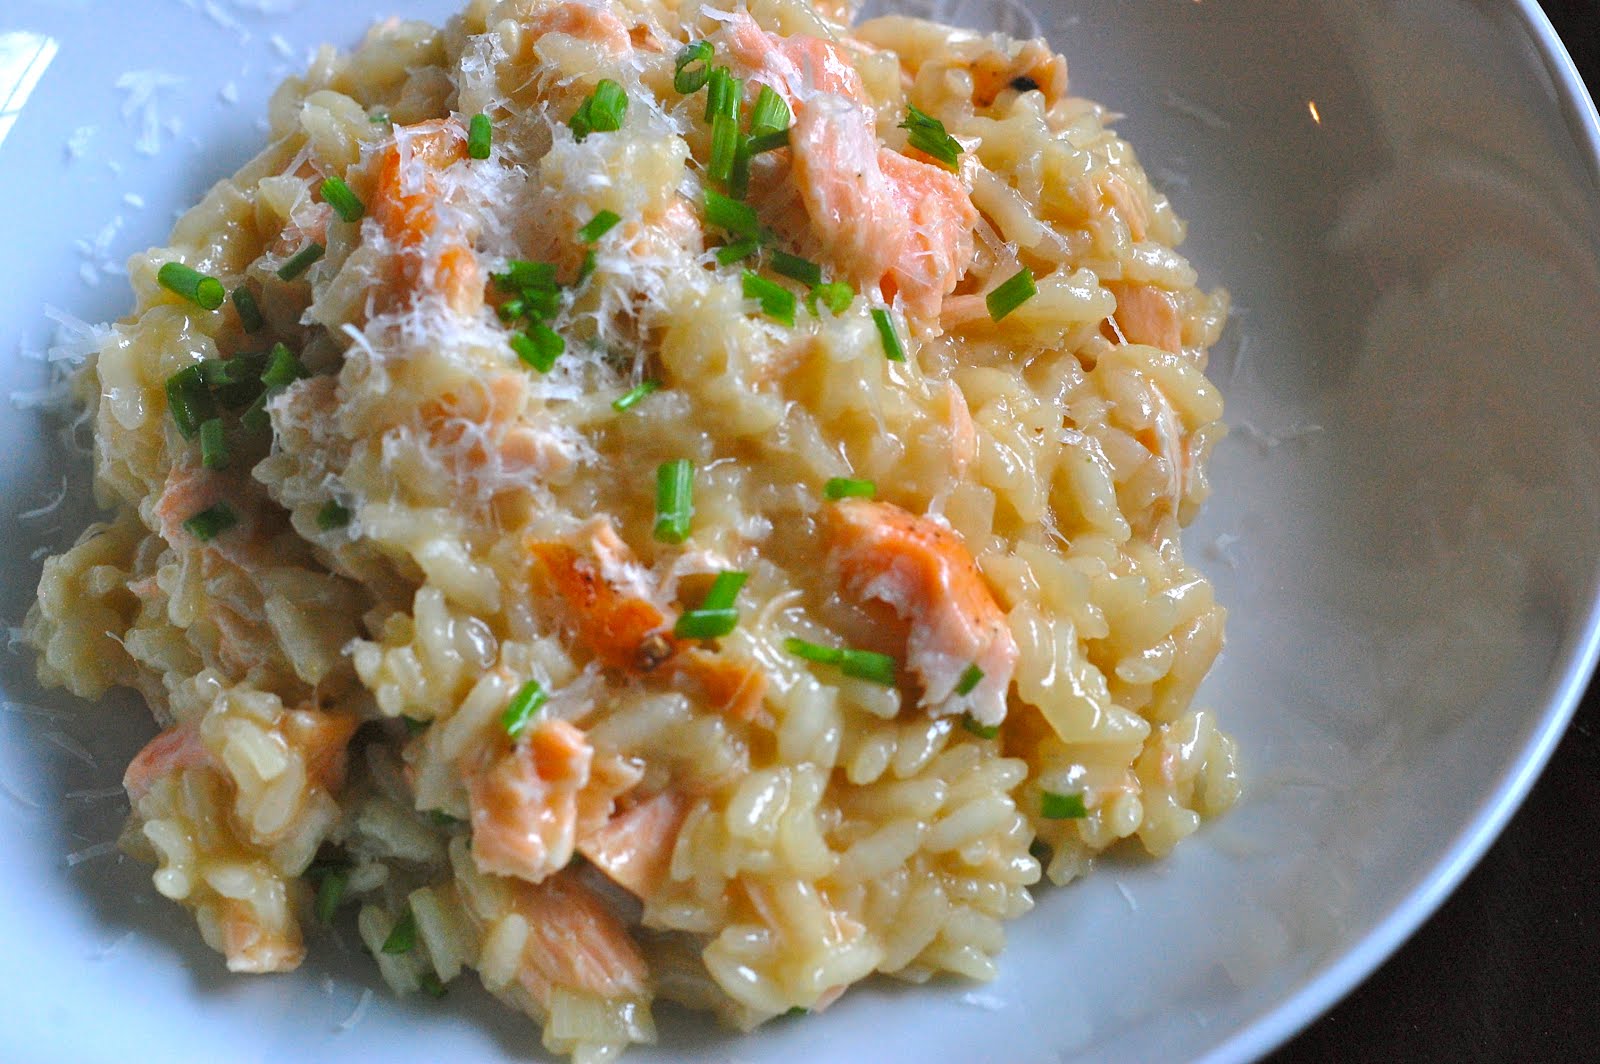 Low-FODMAP Salmon Risotto